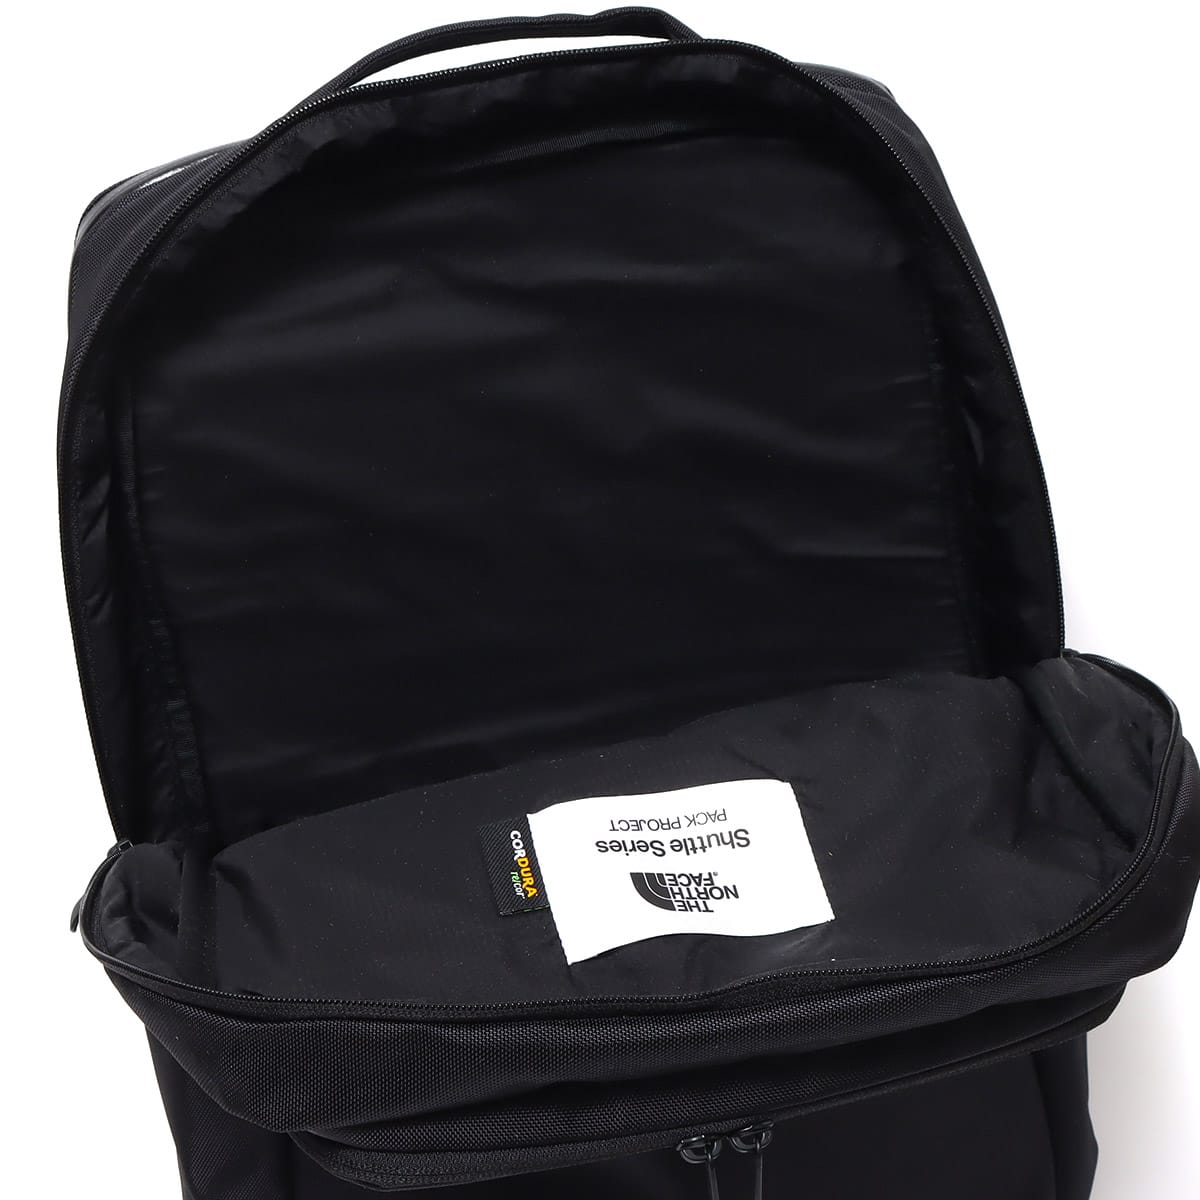 THE NORTH FACE SHUTTLE DAYPACK BLACK 23SS-I